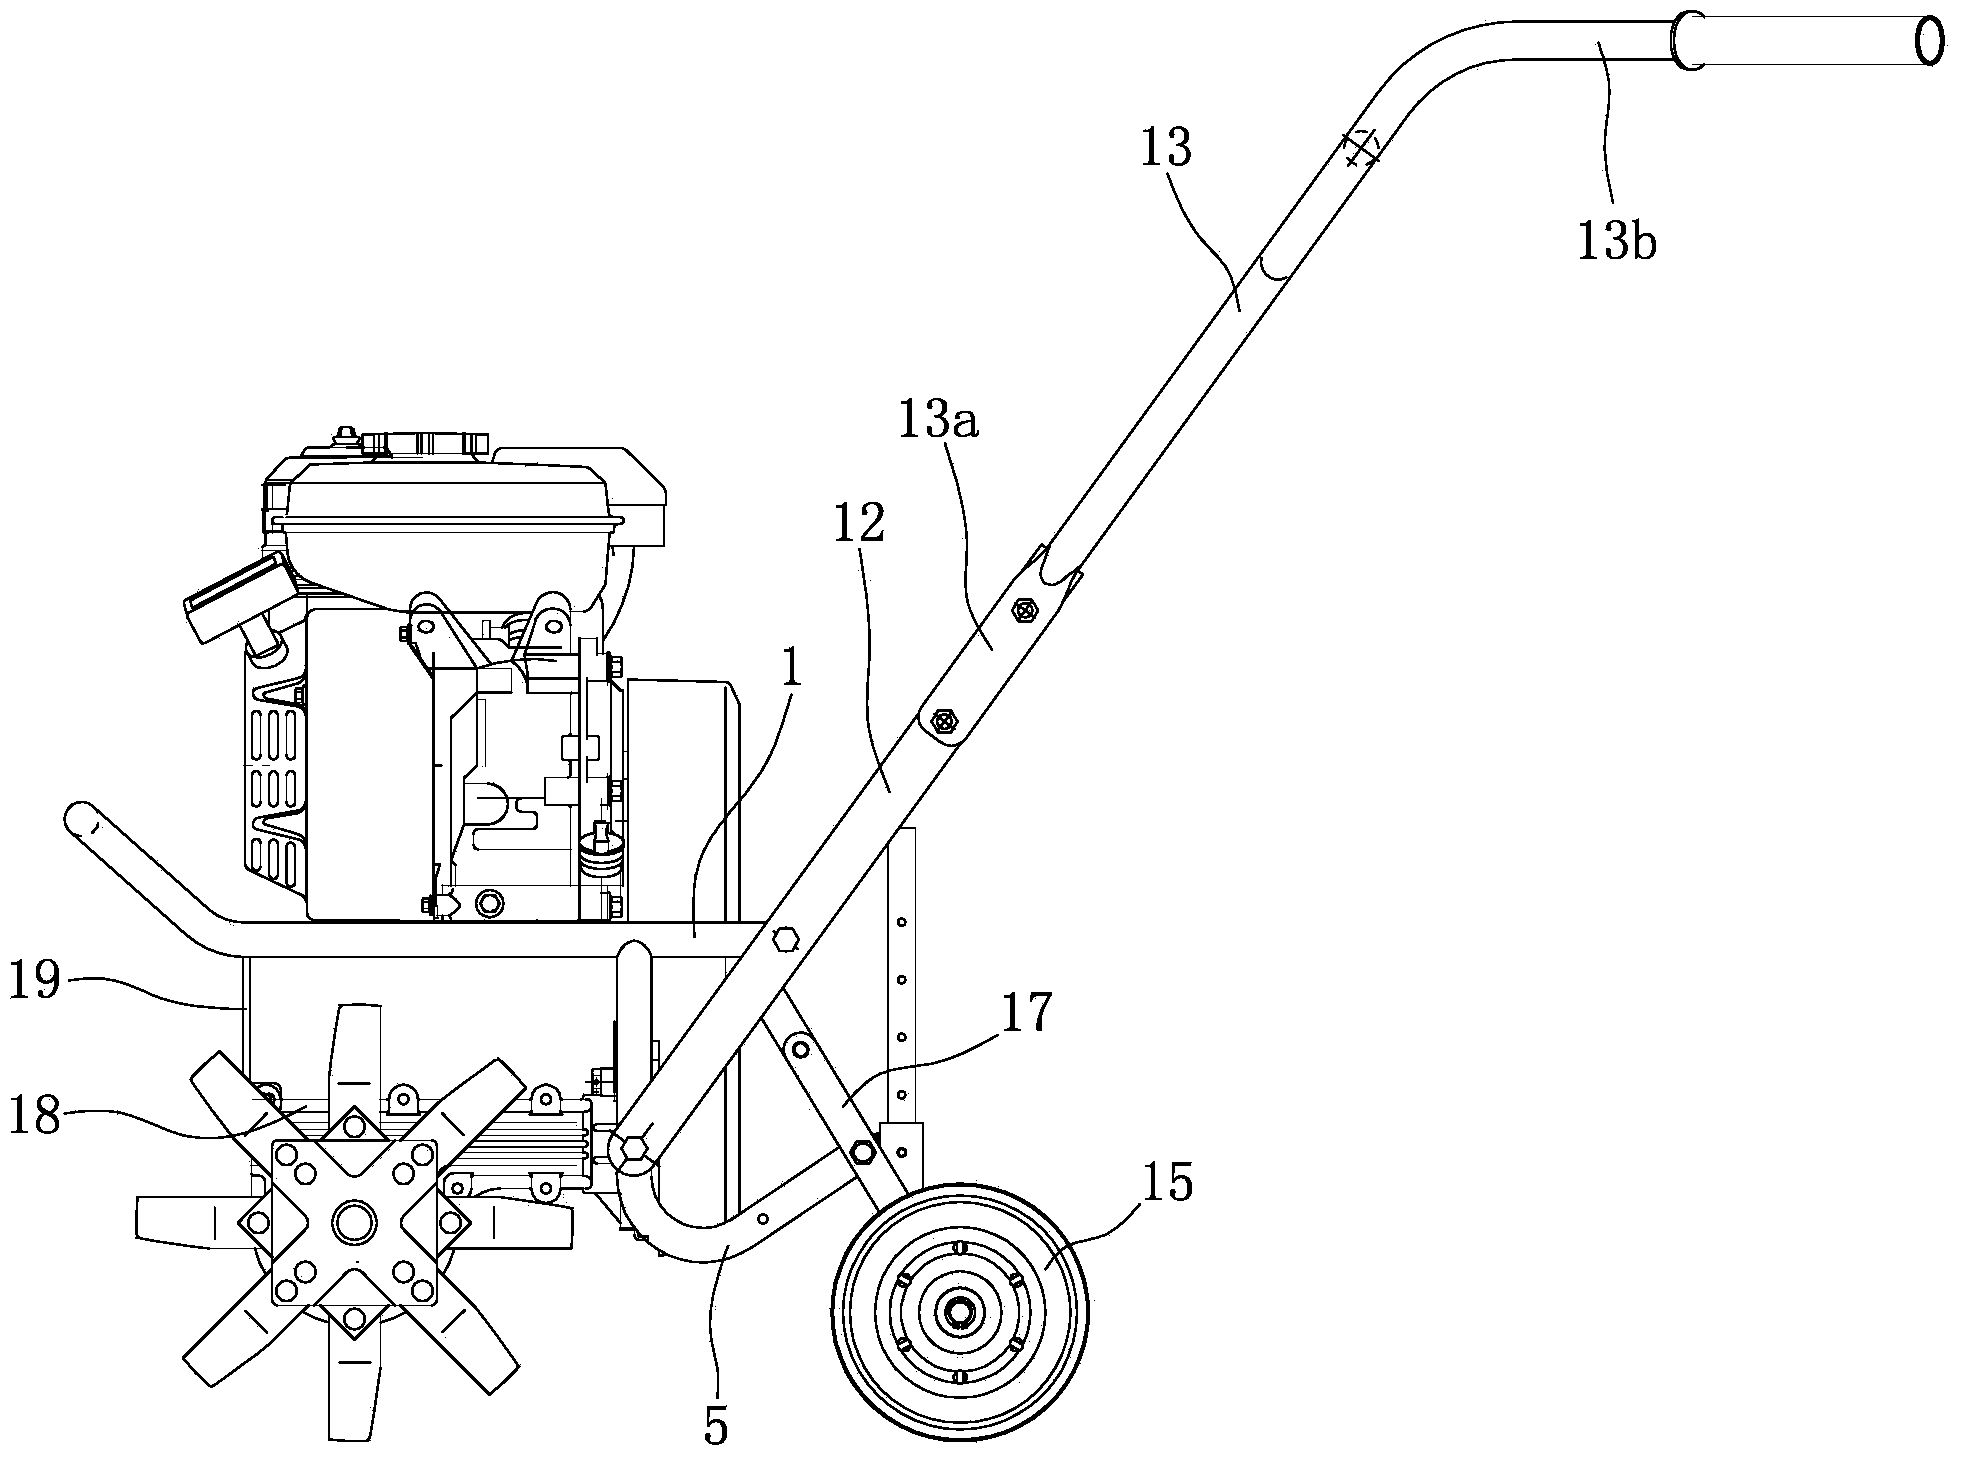 Arrangement structure for handgrip seat, rear wheel assembly and transmission case of portable micro ploughing machine